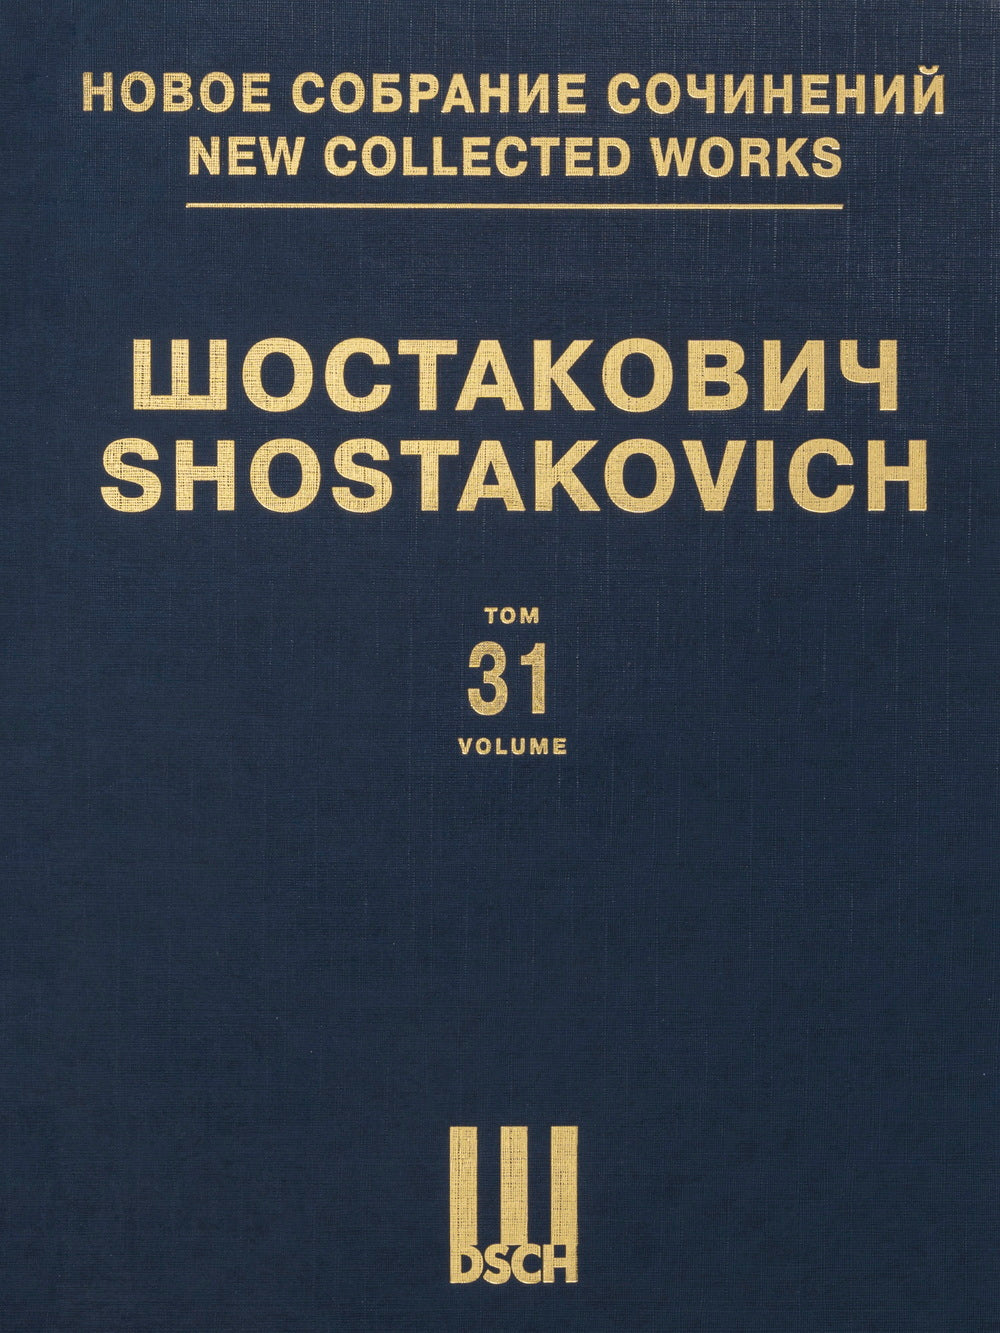 Shostakovich: Orchestral Compositions of Different Years